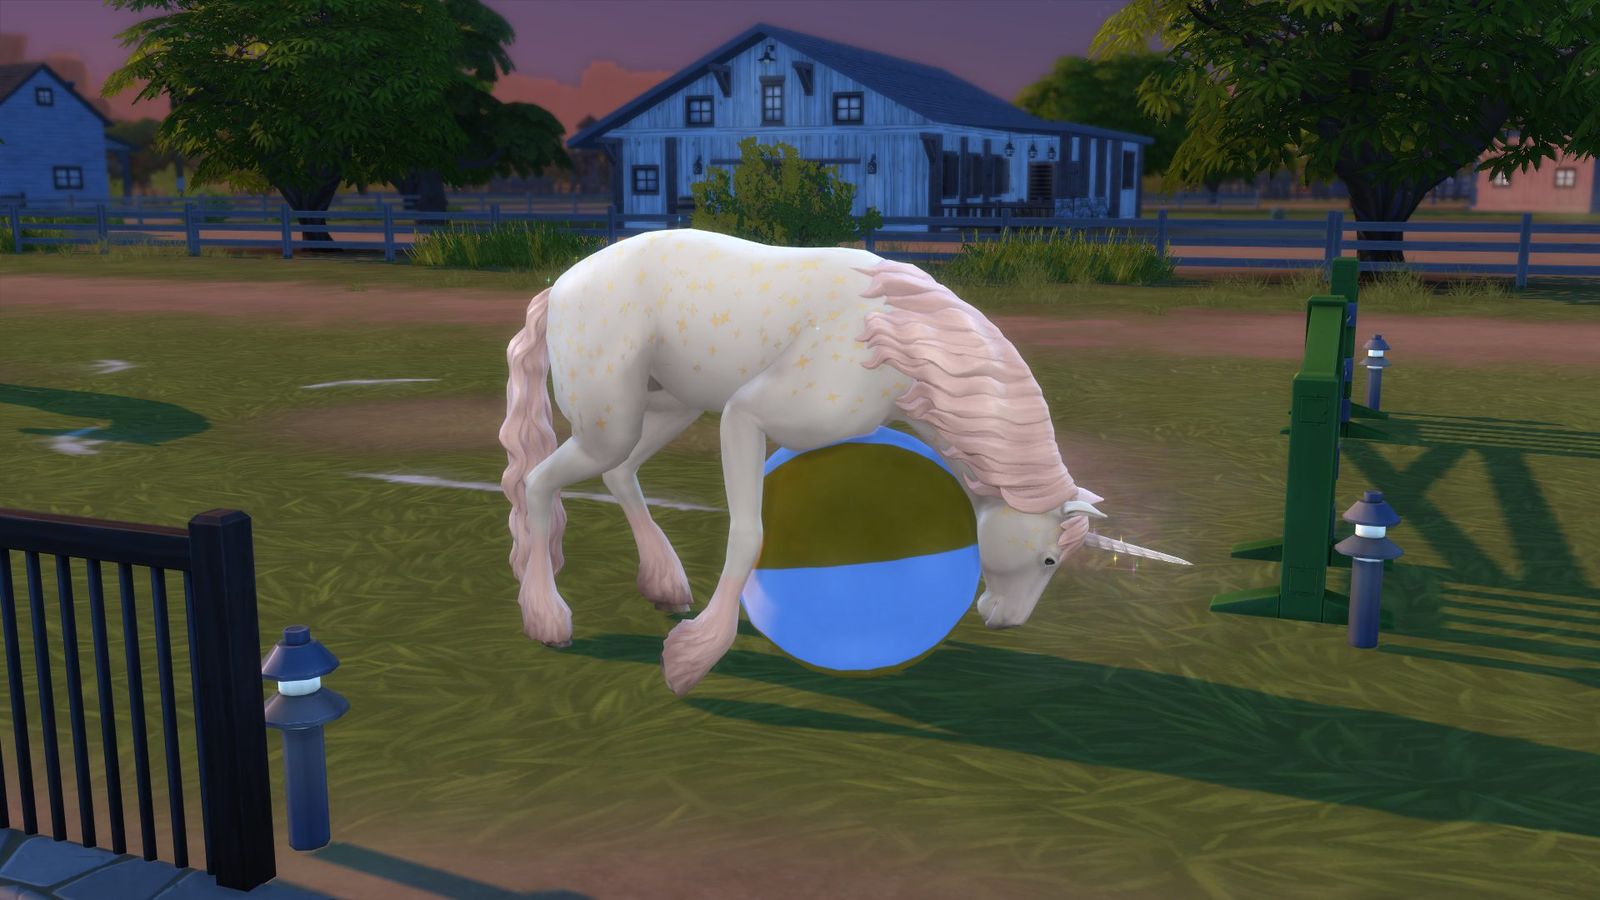 The Sims 4 horse ranch dlc review - unicorn stuck on top of a ball